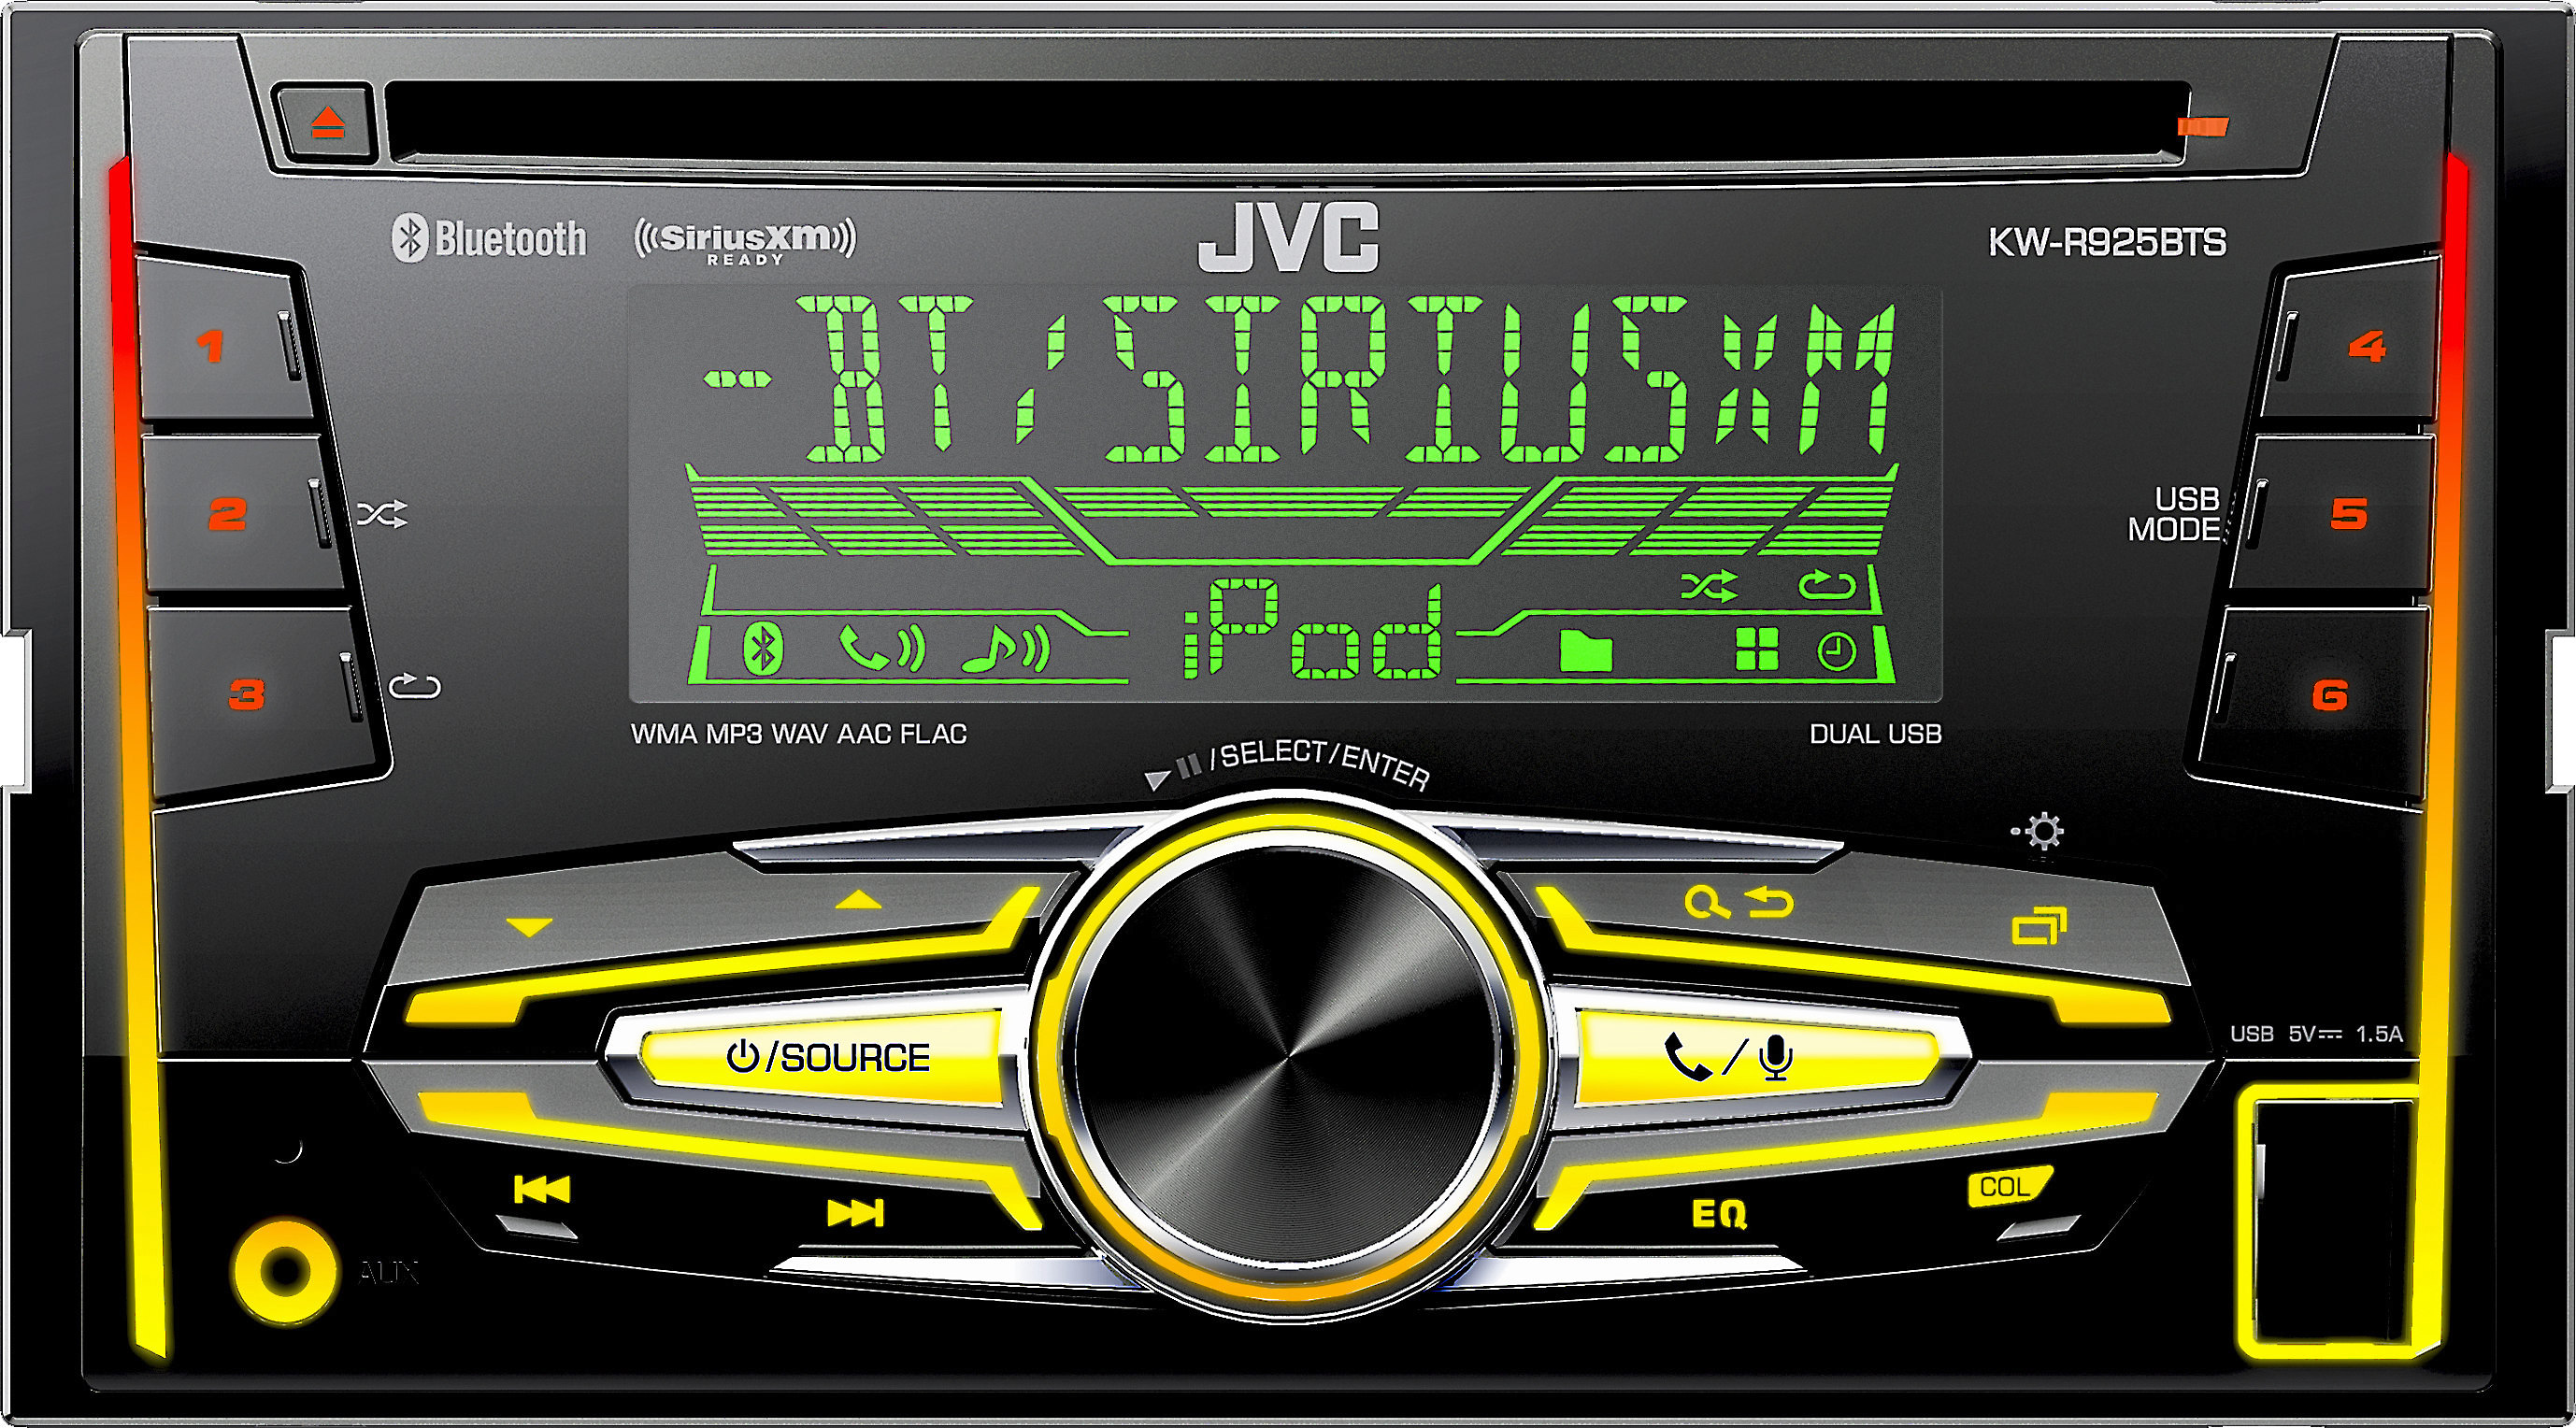 Jvc radio hook up | How to Connect a Stereo System. 2020-03-19